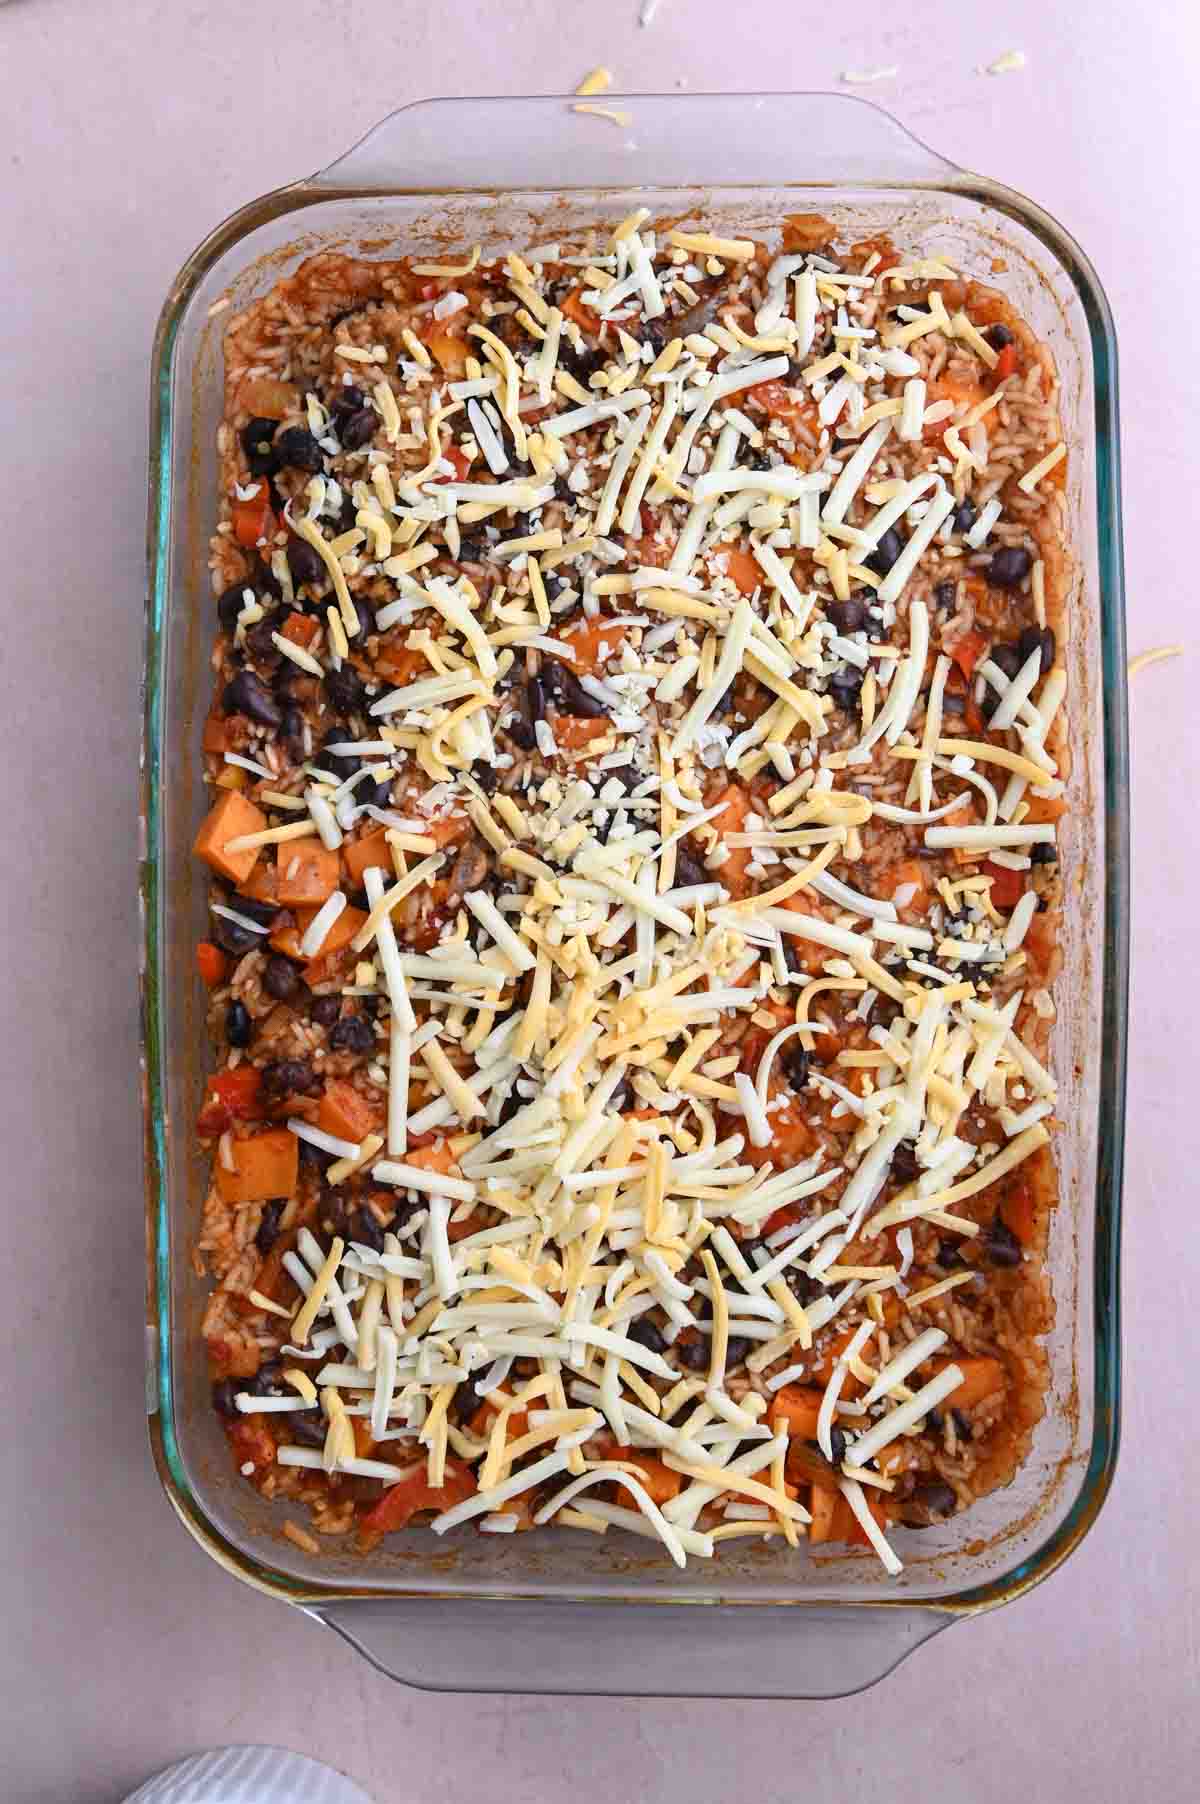 Rice and bean bake topped with shredded cheese.